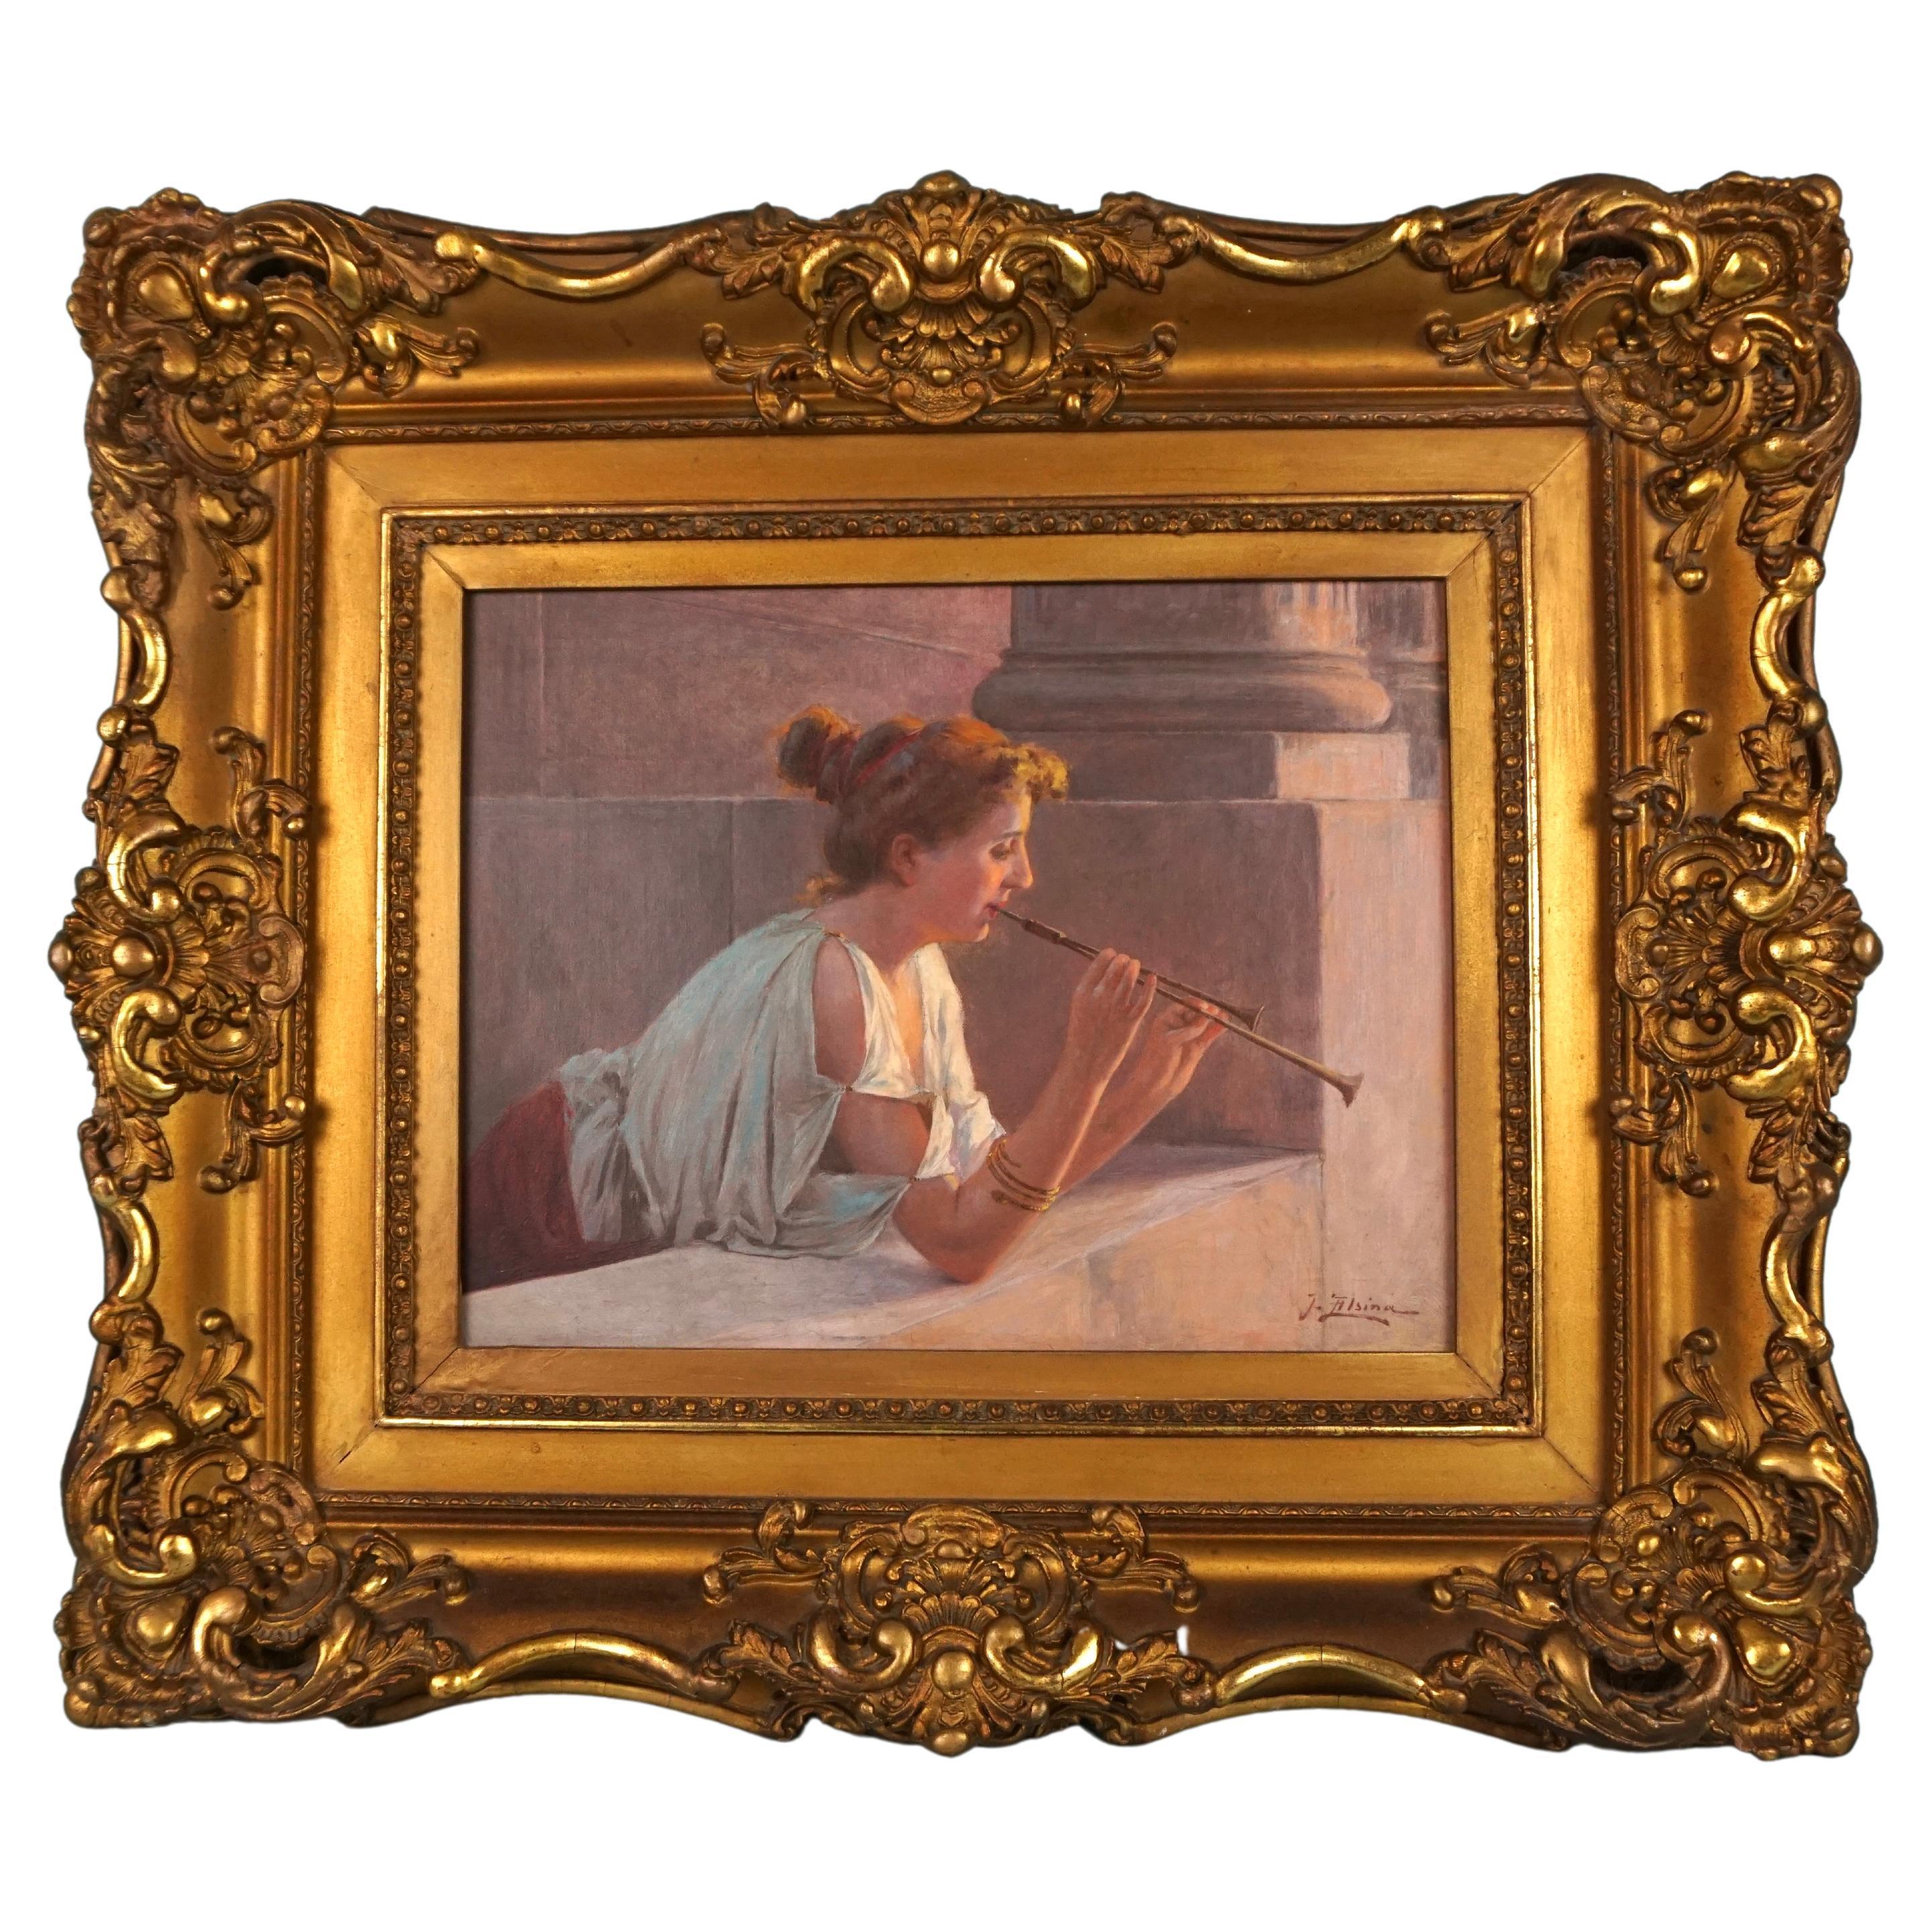 Elegant Oil on Canvas of a Flutist by Jacques Alsina 'French 19th Century'